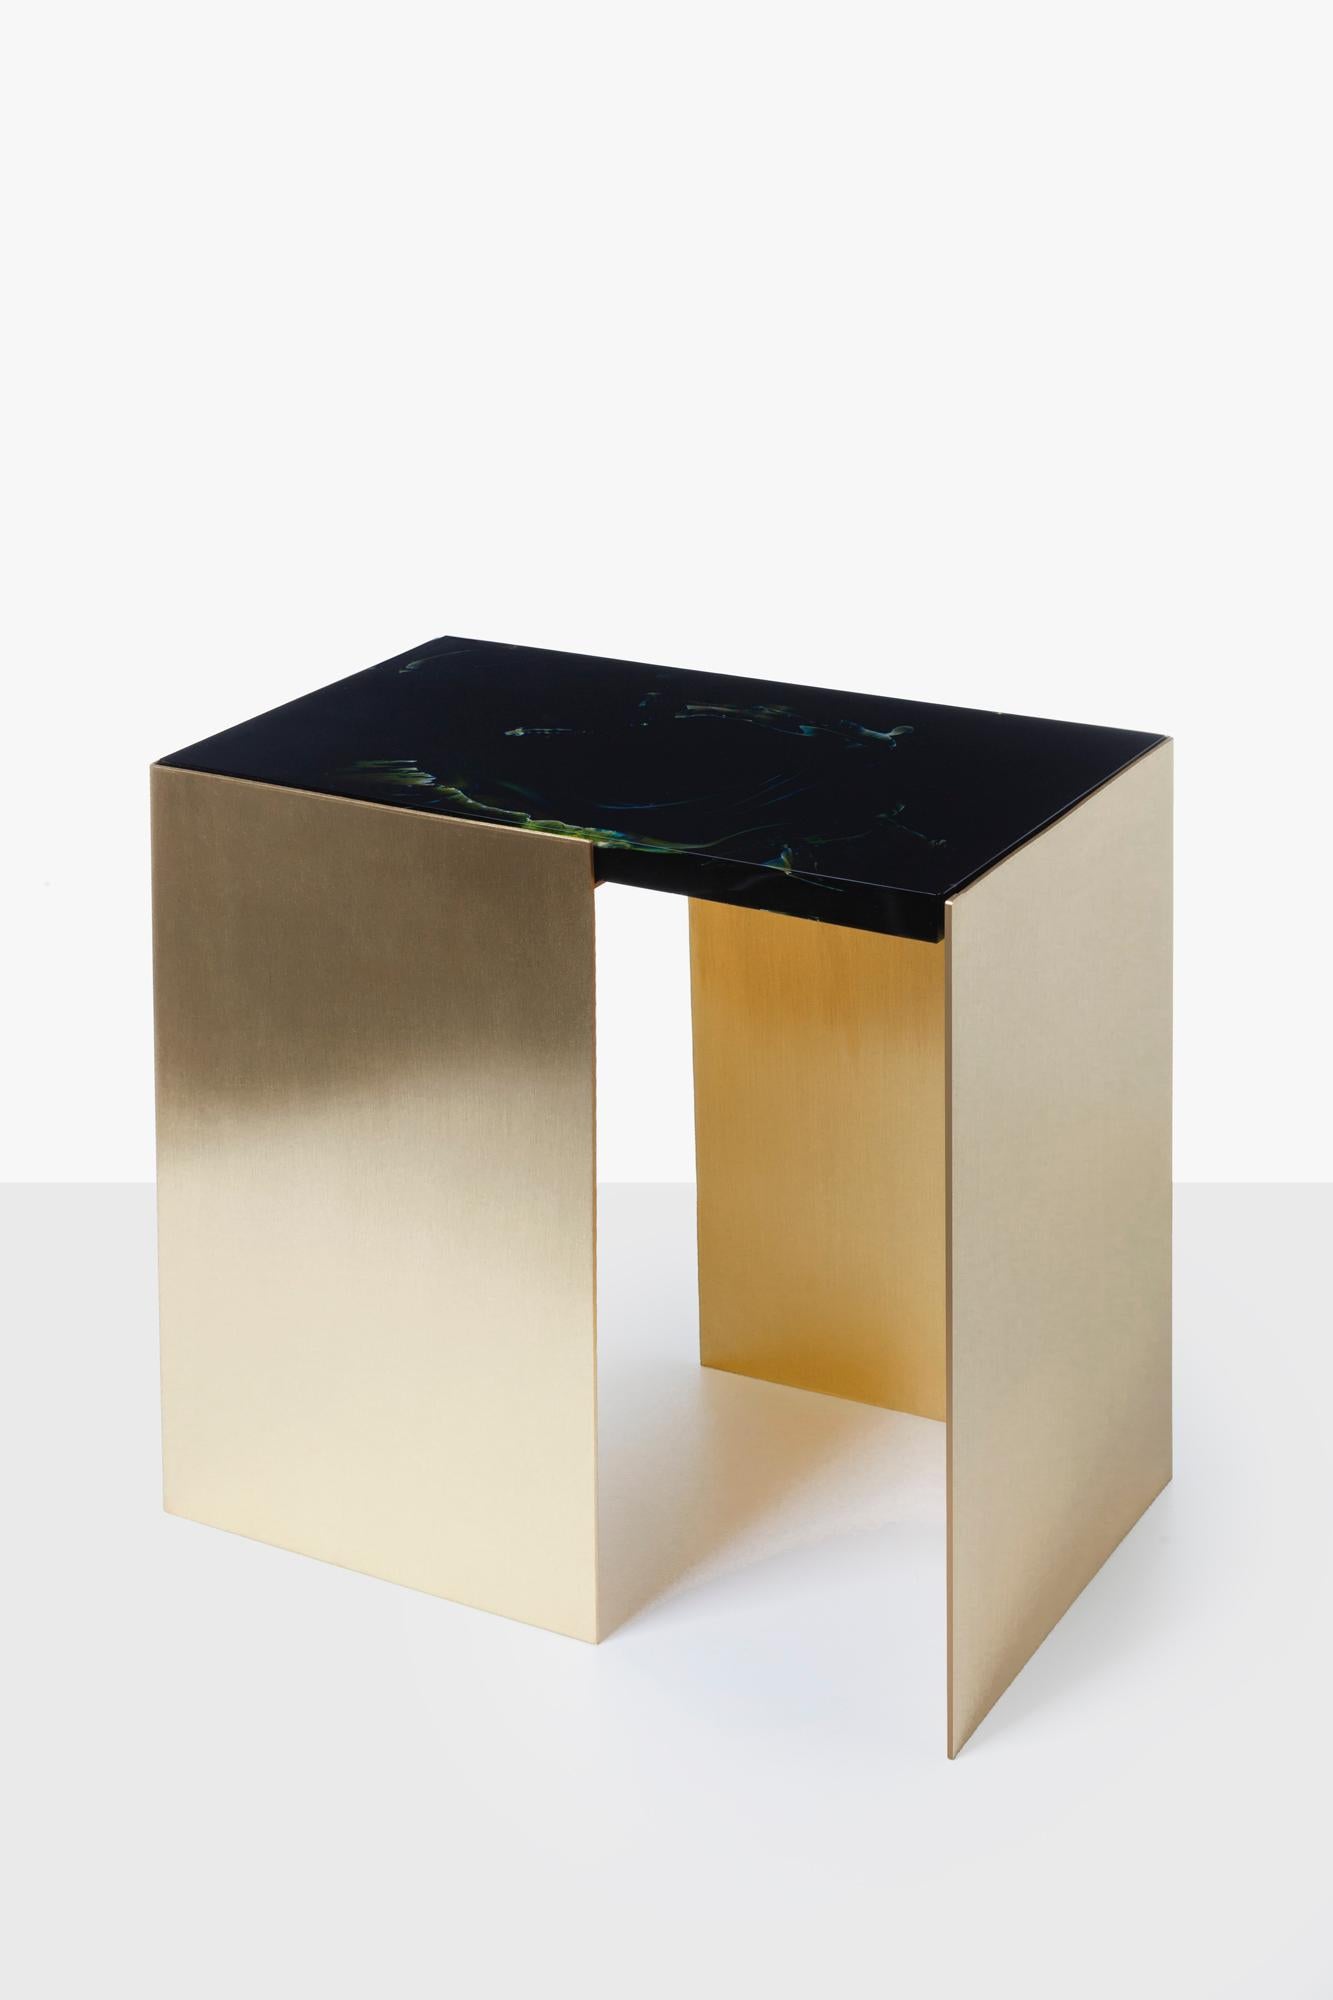 Lithyalin and brass table by Dechem Studio.
Dimensions: D 27 x W 45 x H 45 cm.
Materials: glass, brass.

This simple yet sophisticated coffee table features a minimal geometric construction combined with a marble-like decorative glass top. The